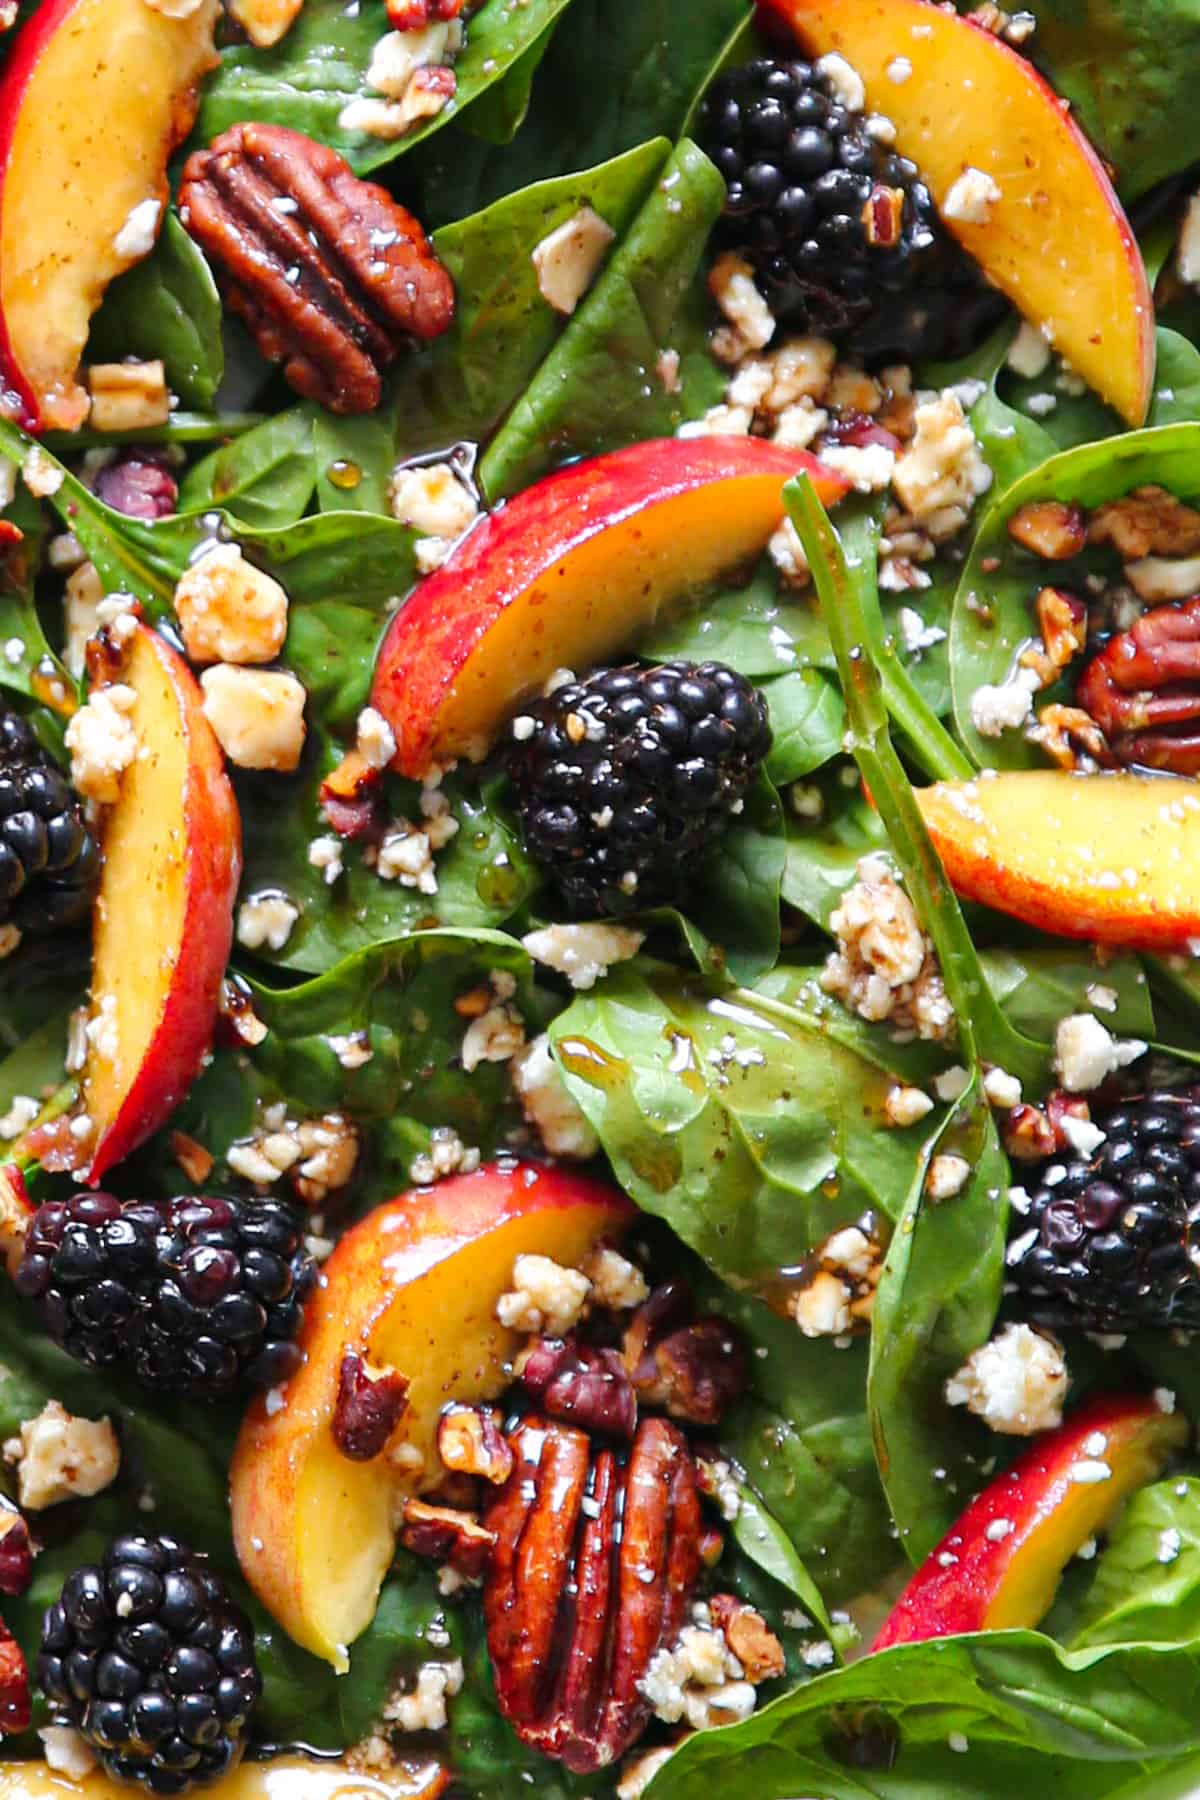 Summer Peach Spinach Salad with Blackberries, Pecans, Feta, and Balsamic Glaze (close-up photo).